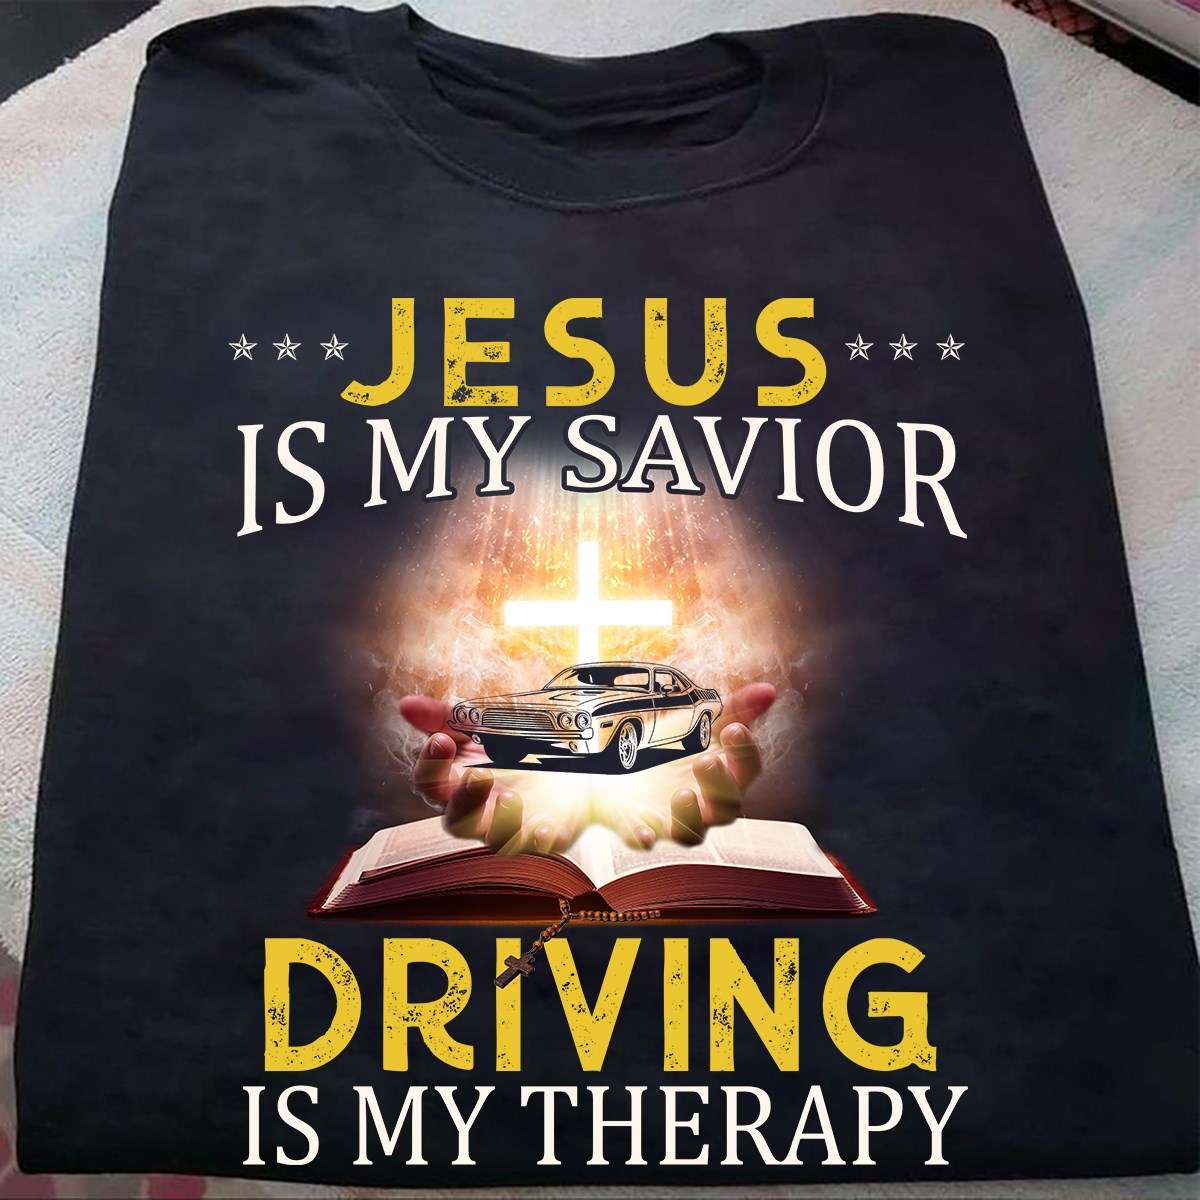 Jesus is my savior, Driving is my therapy - Driving drag car